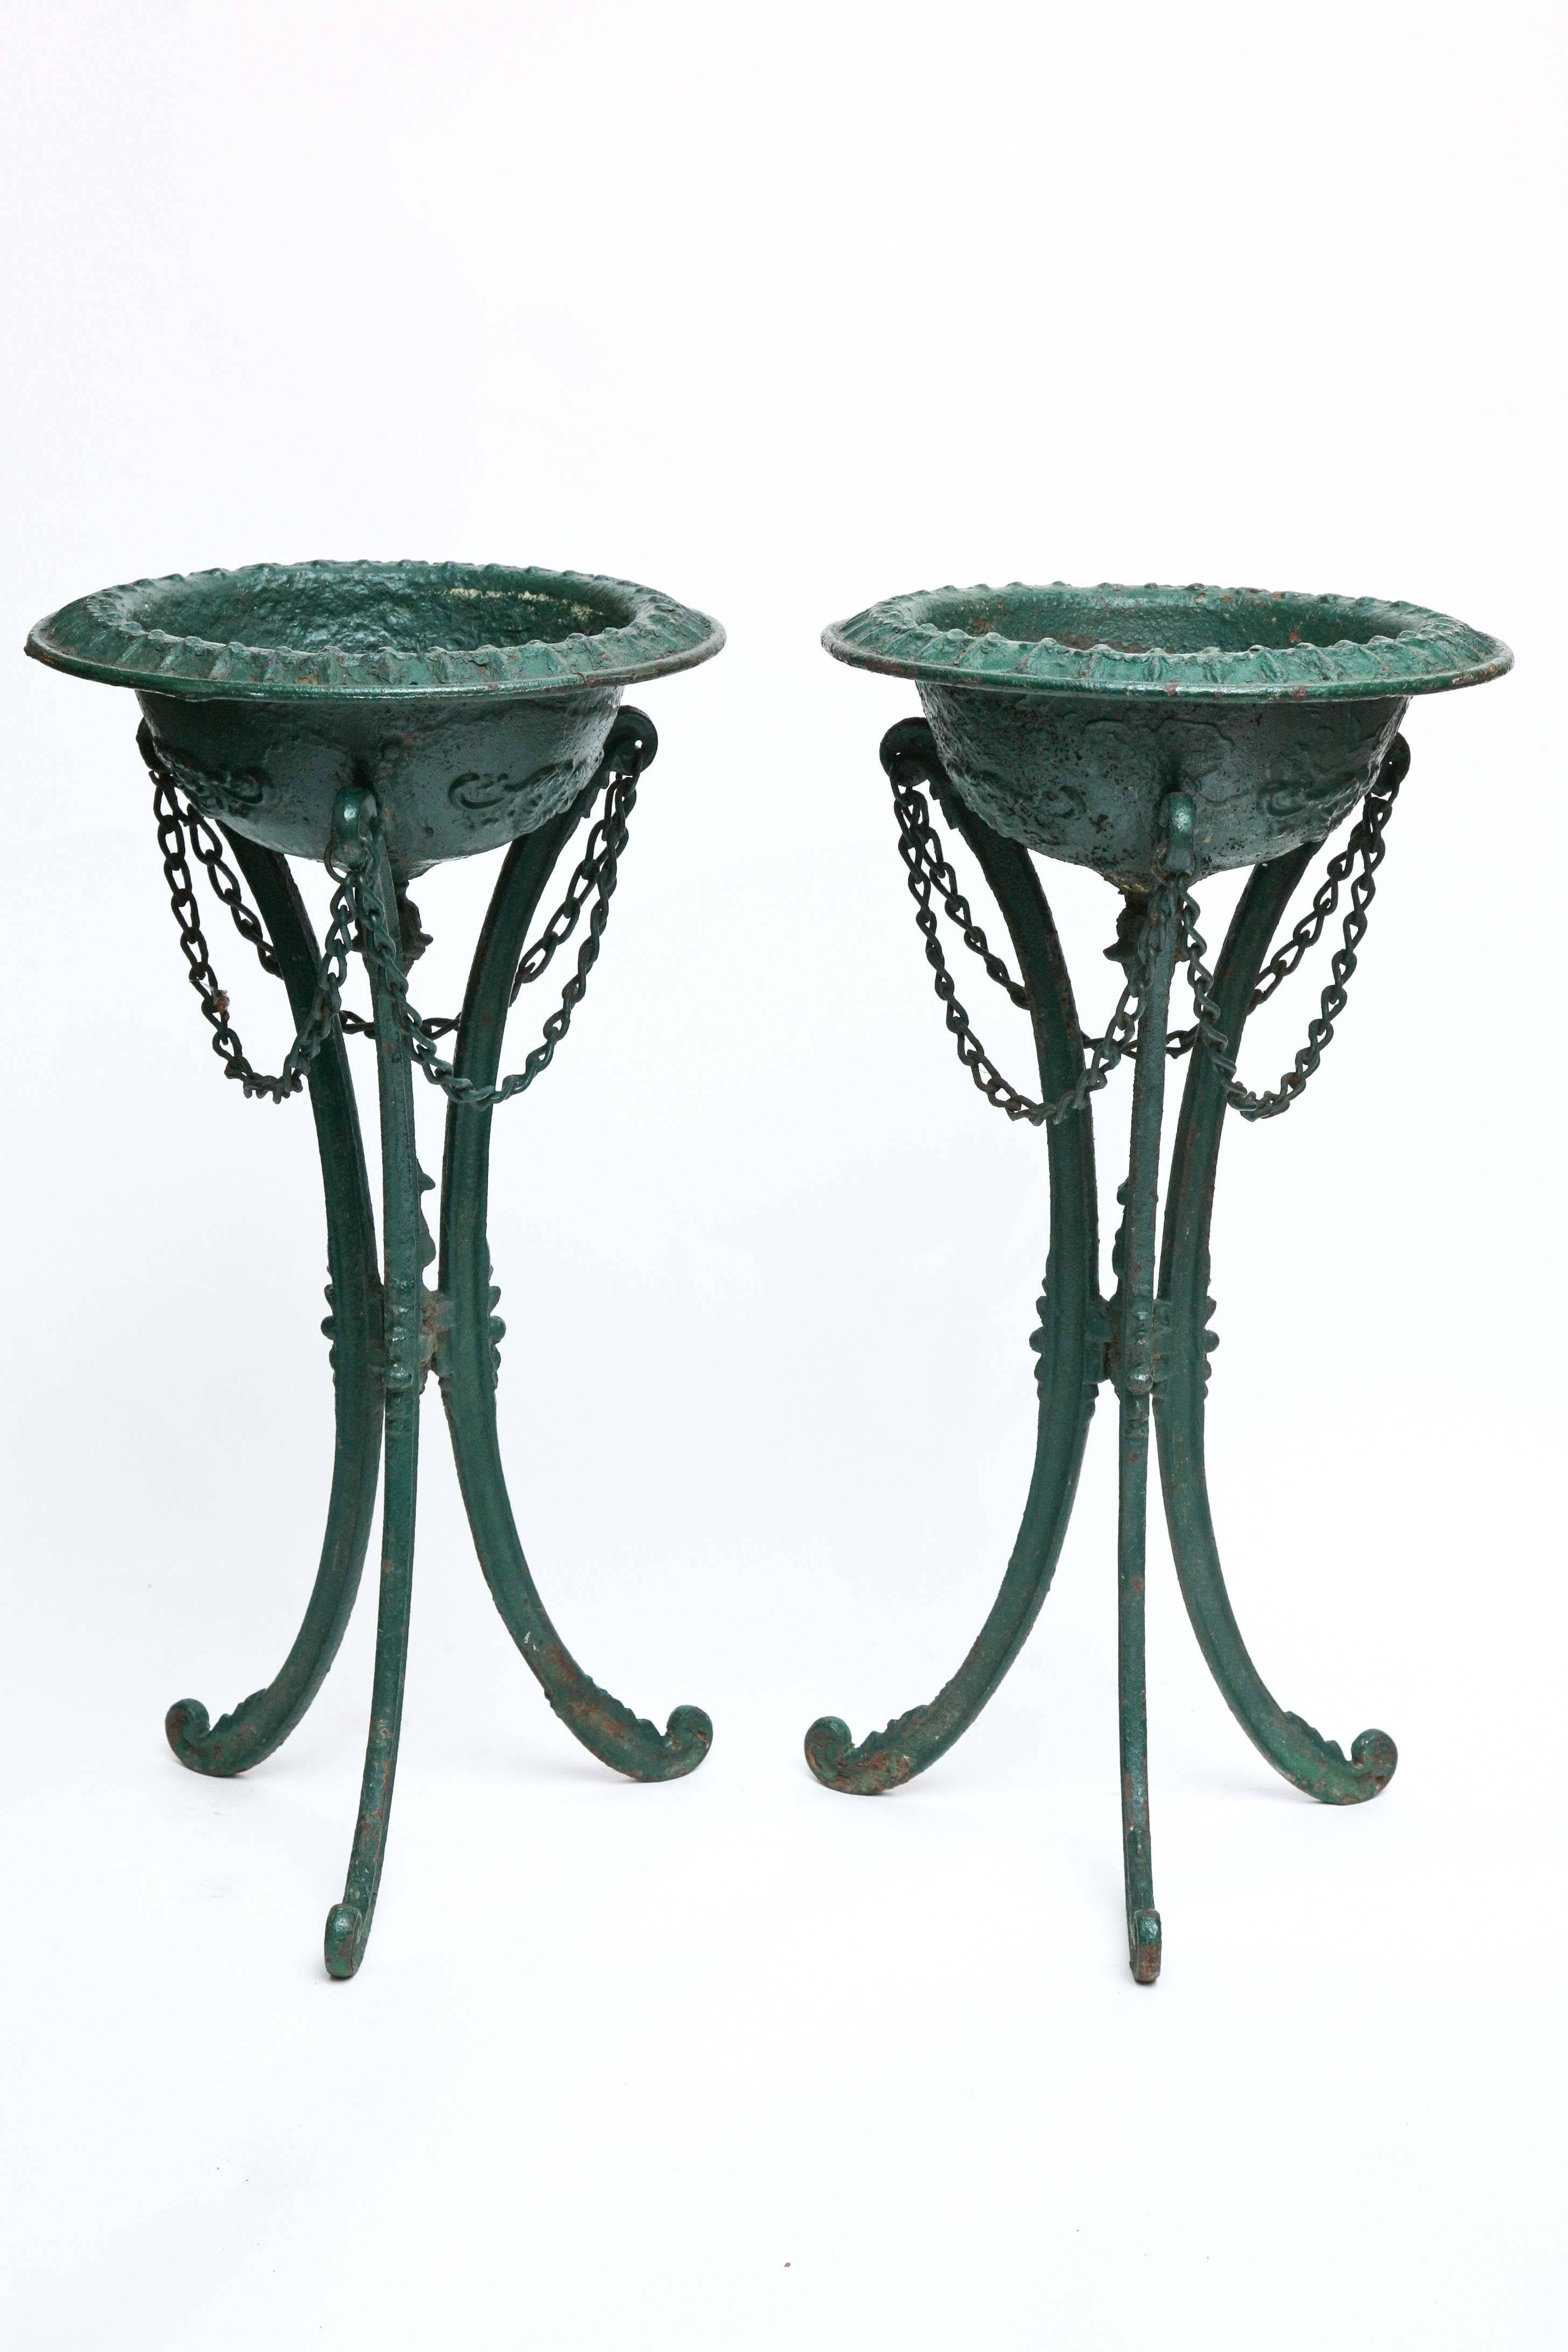 A rare find. The pair of "pots" are appointed with a border of fleur-de-lis raised on an unusual tripod base with swags of chains.